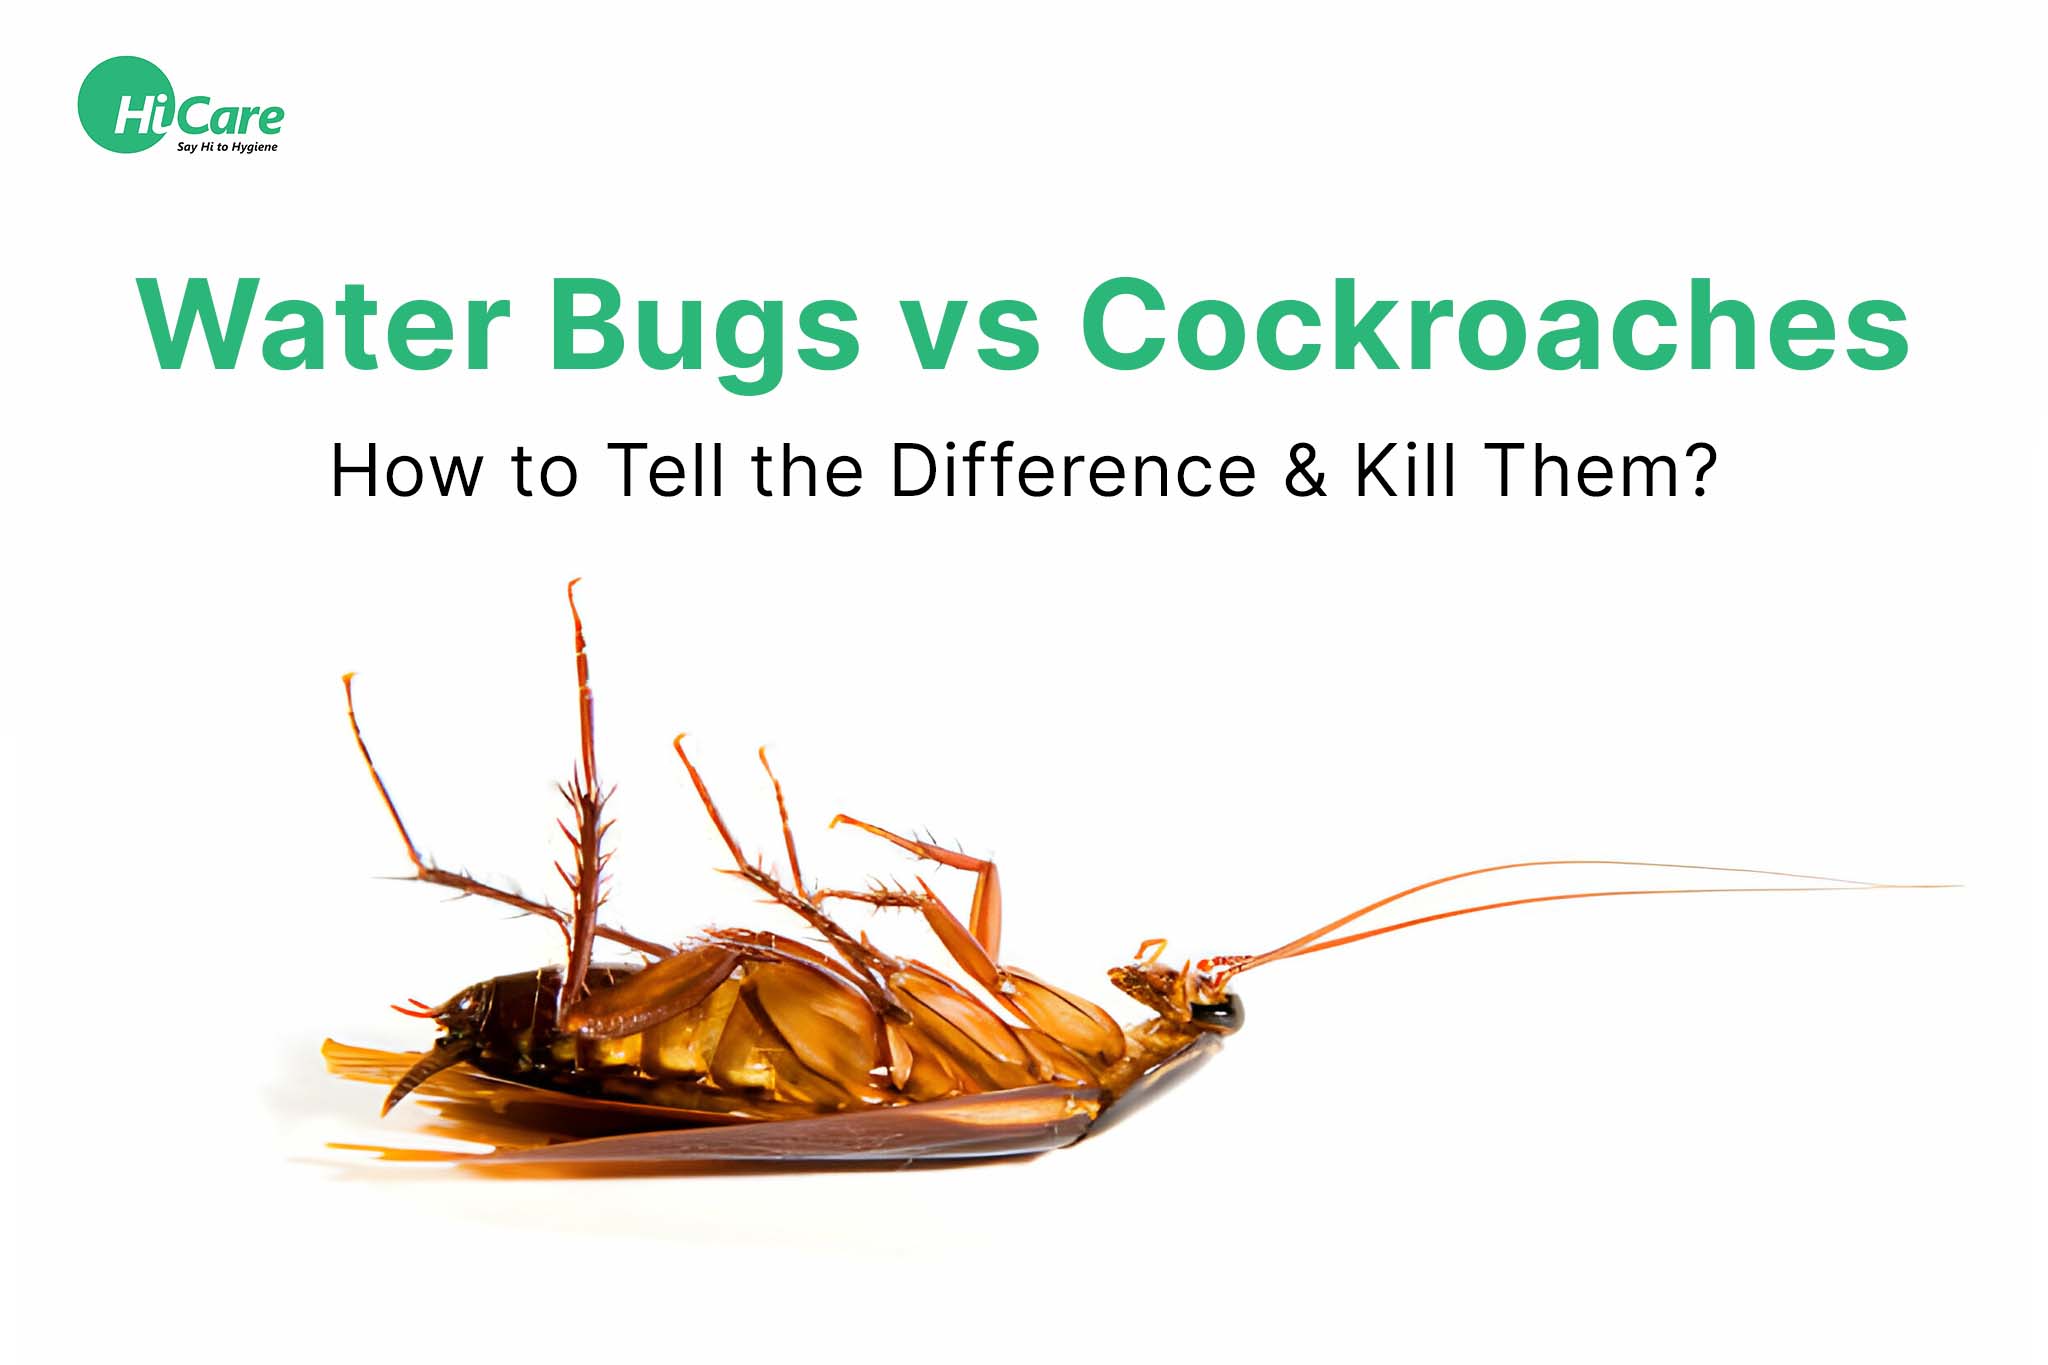 Water Bugs vs Cockroaches: How to Tell the Difference & Kill Them?